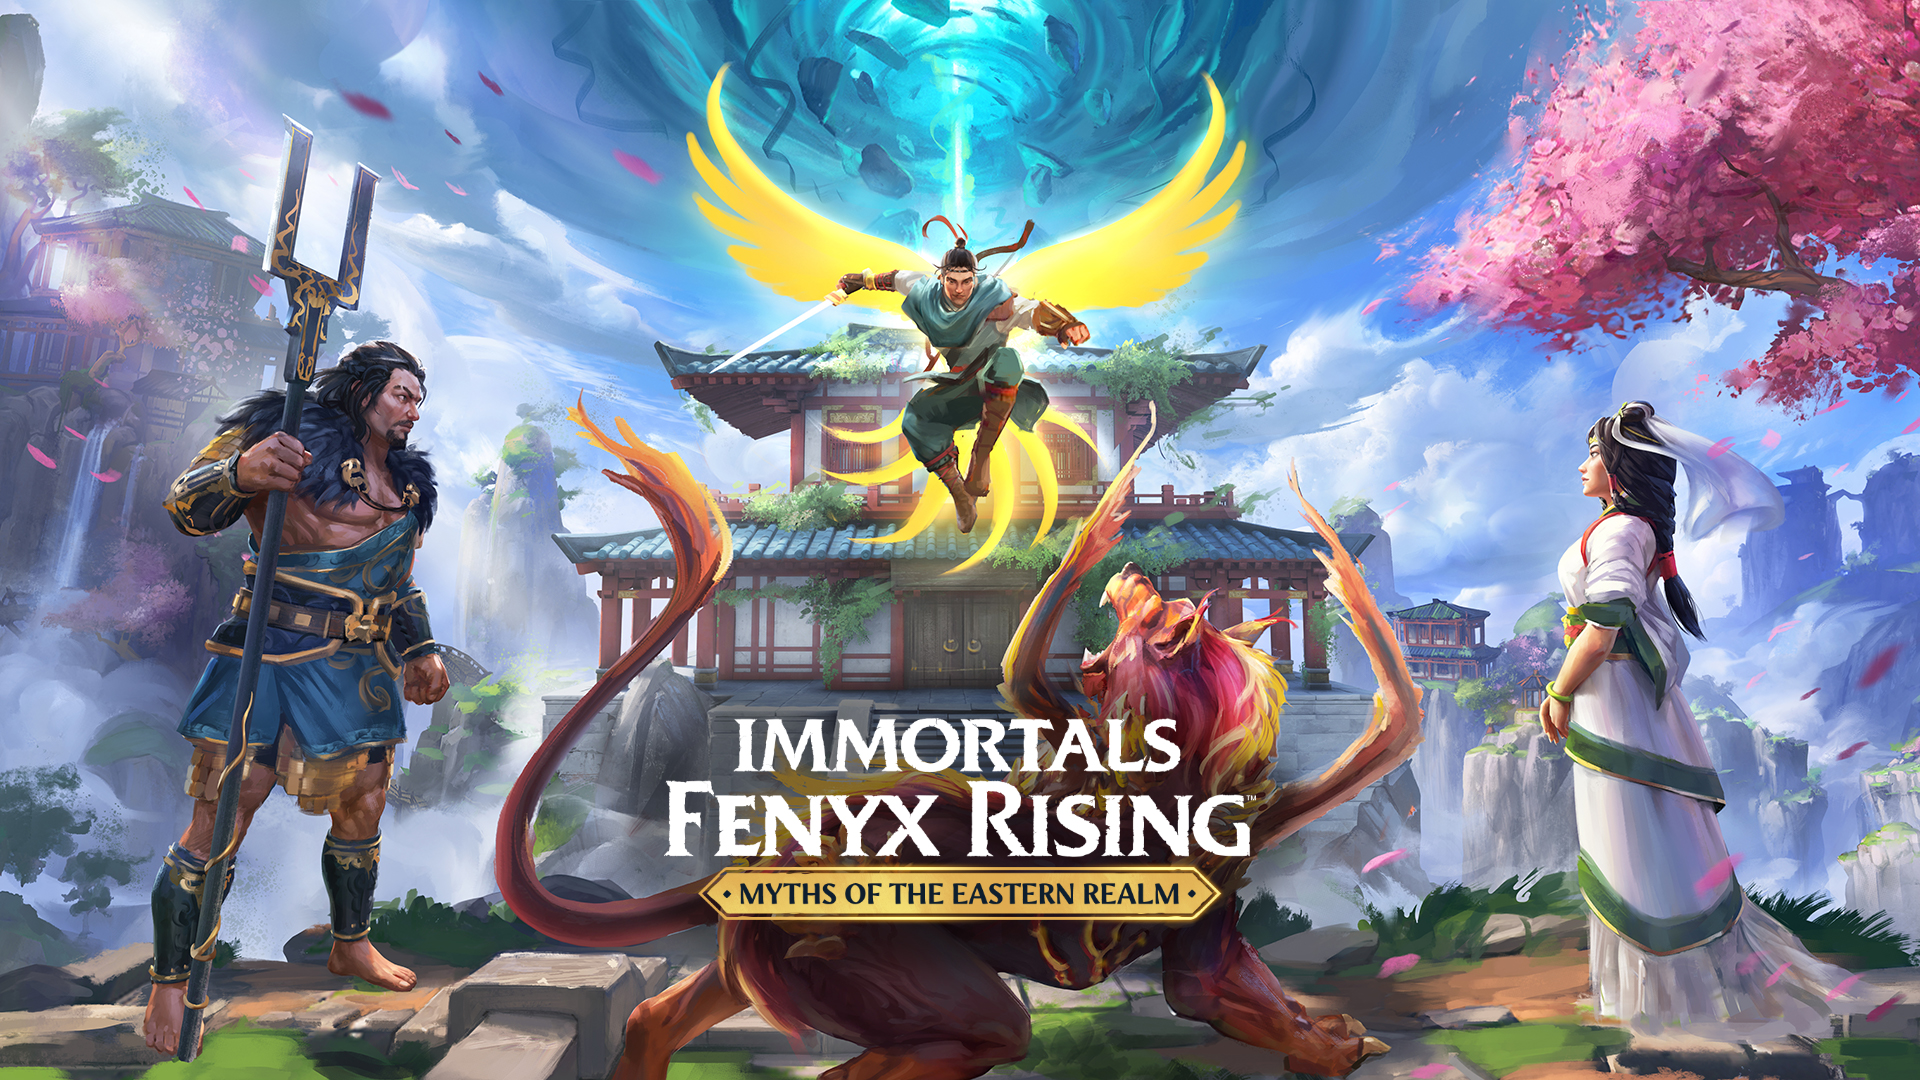 IMMORTALS FENYX RISING - Myths of the Eastern Realm